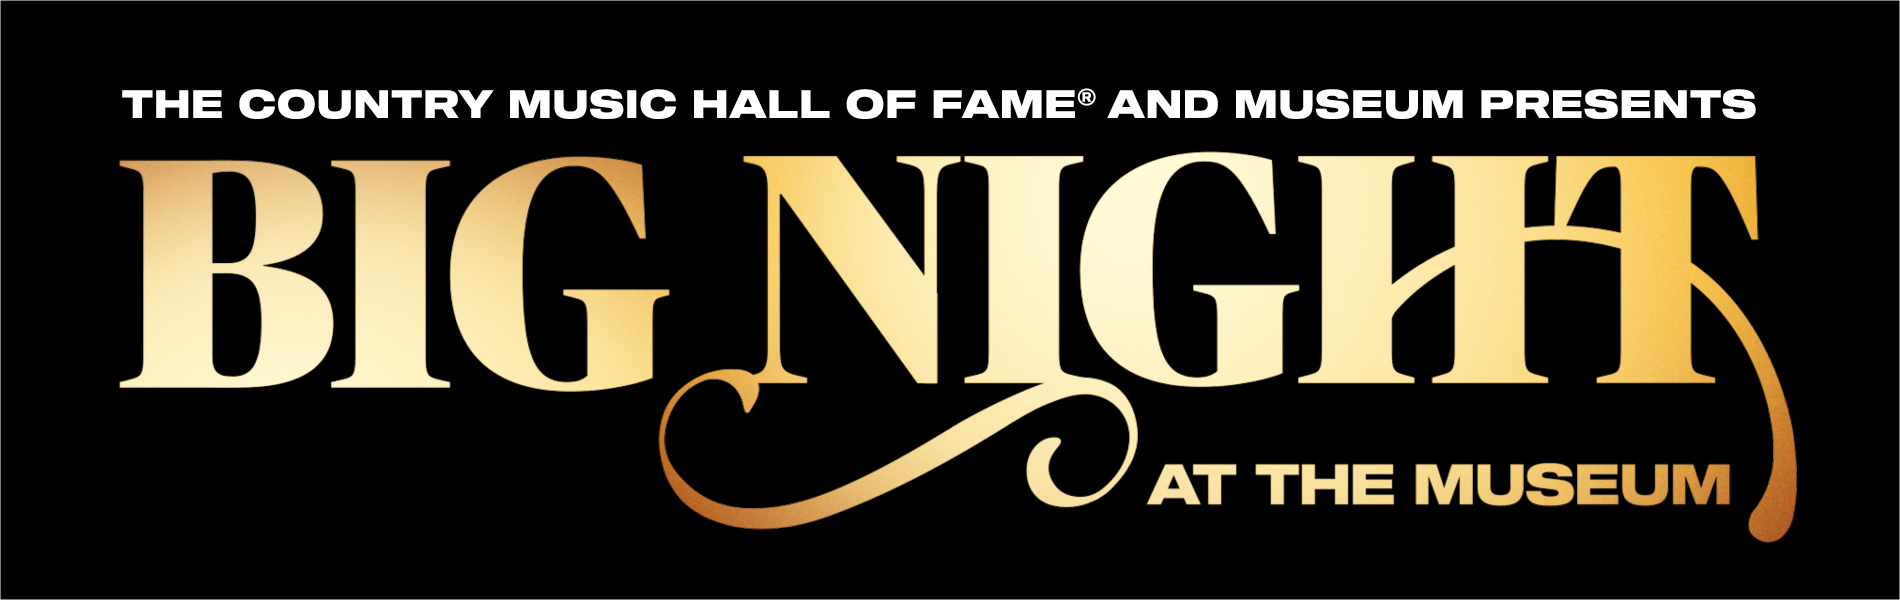 The Country Music Hall of Fame® and Museum presents BIG NIGHT at the museum